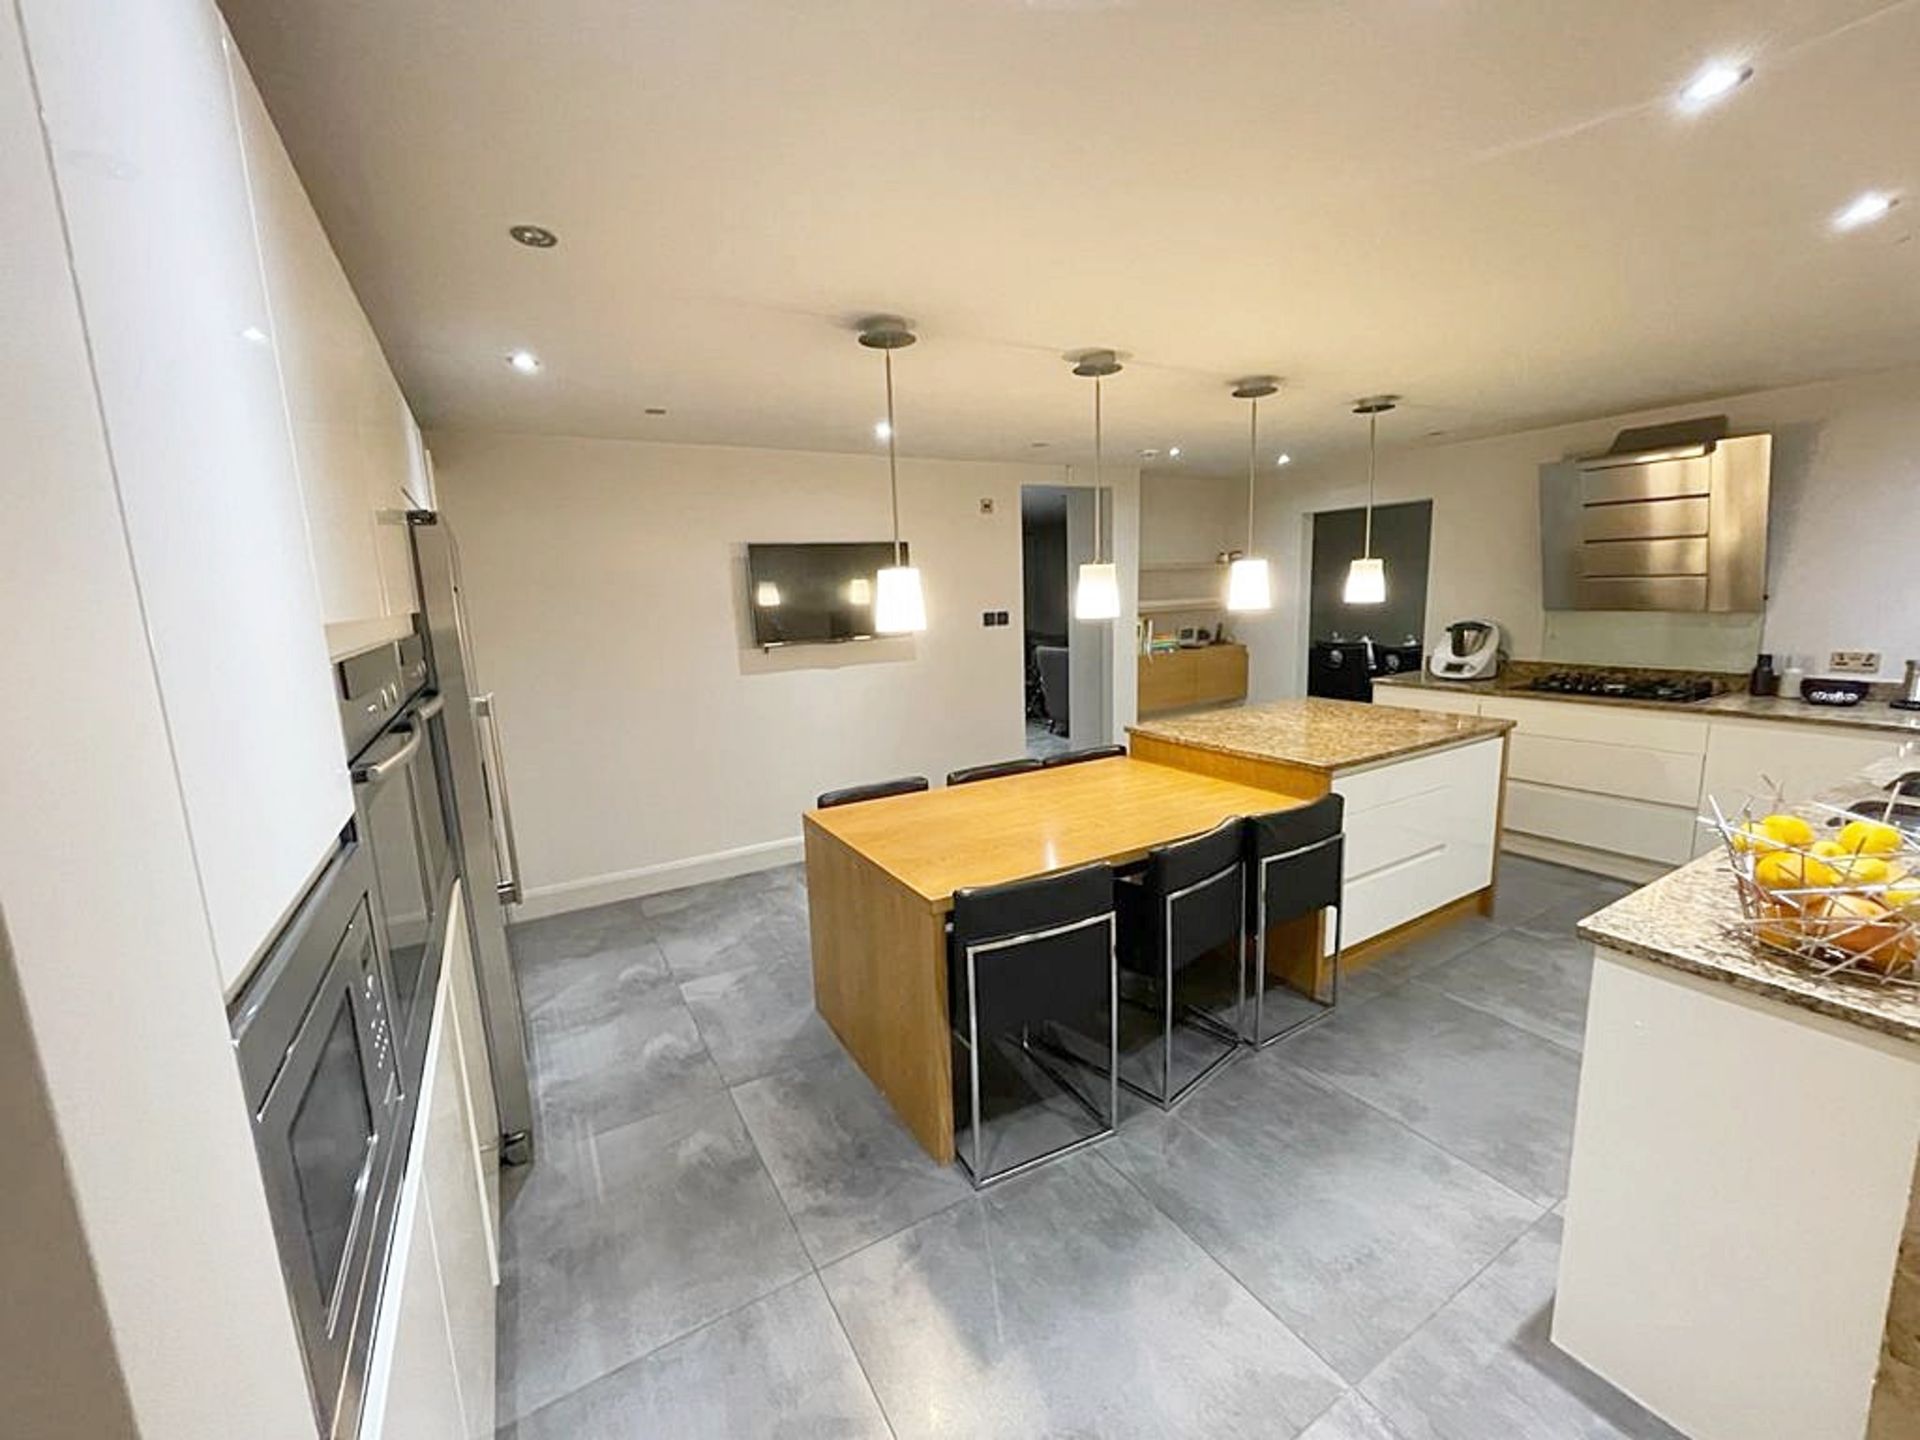 1 x Stunning PARAPAN Handleless Fitted Kitchen with Neff Appliances, Granite Worktops & Island - Image 13 of 126